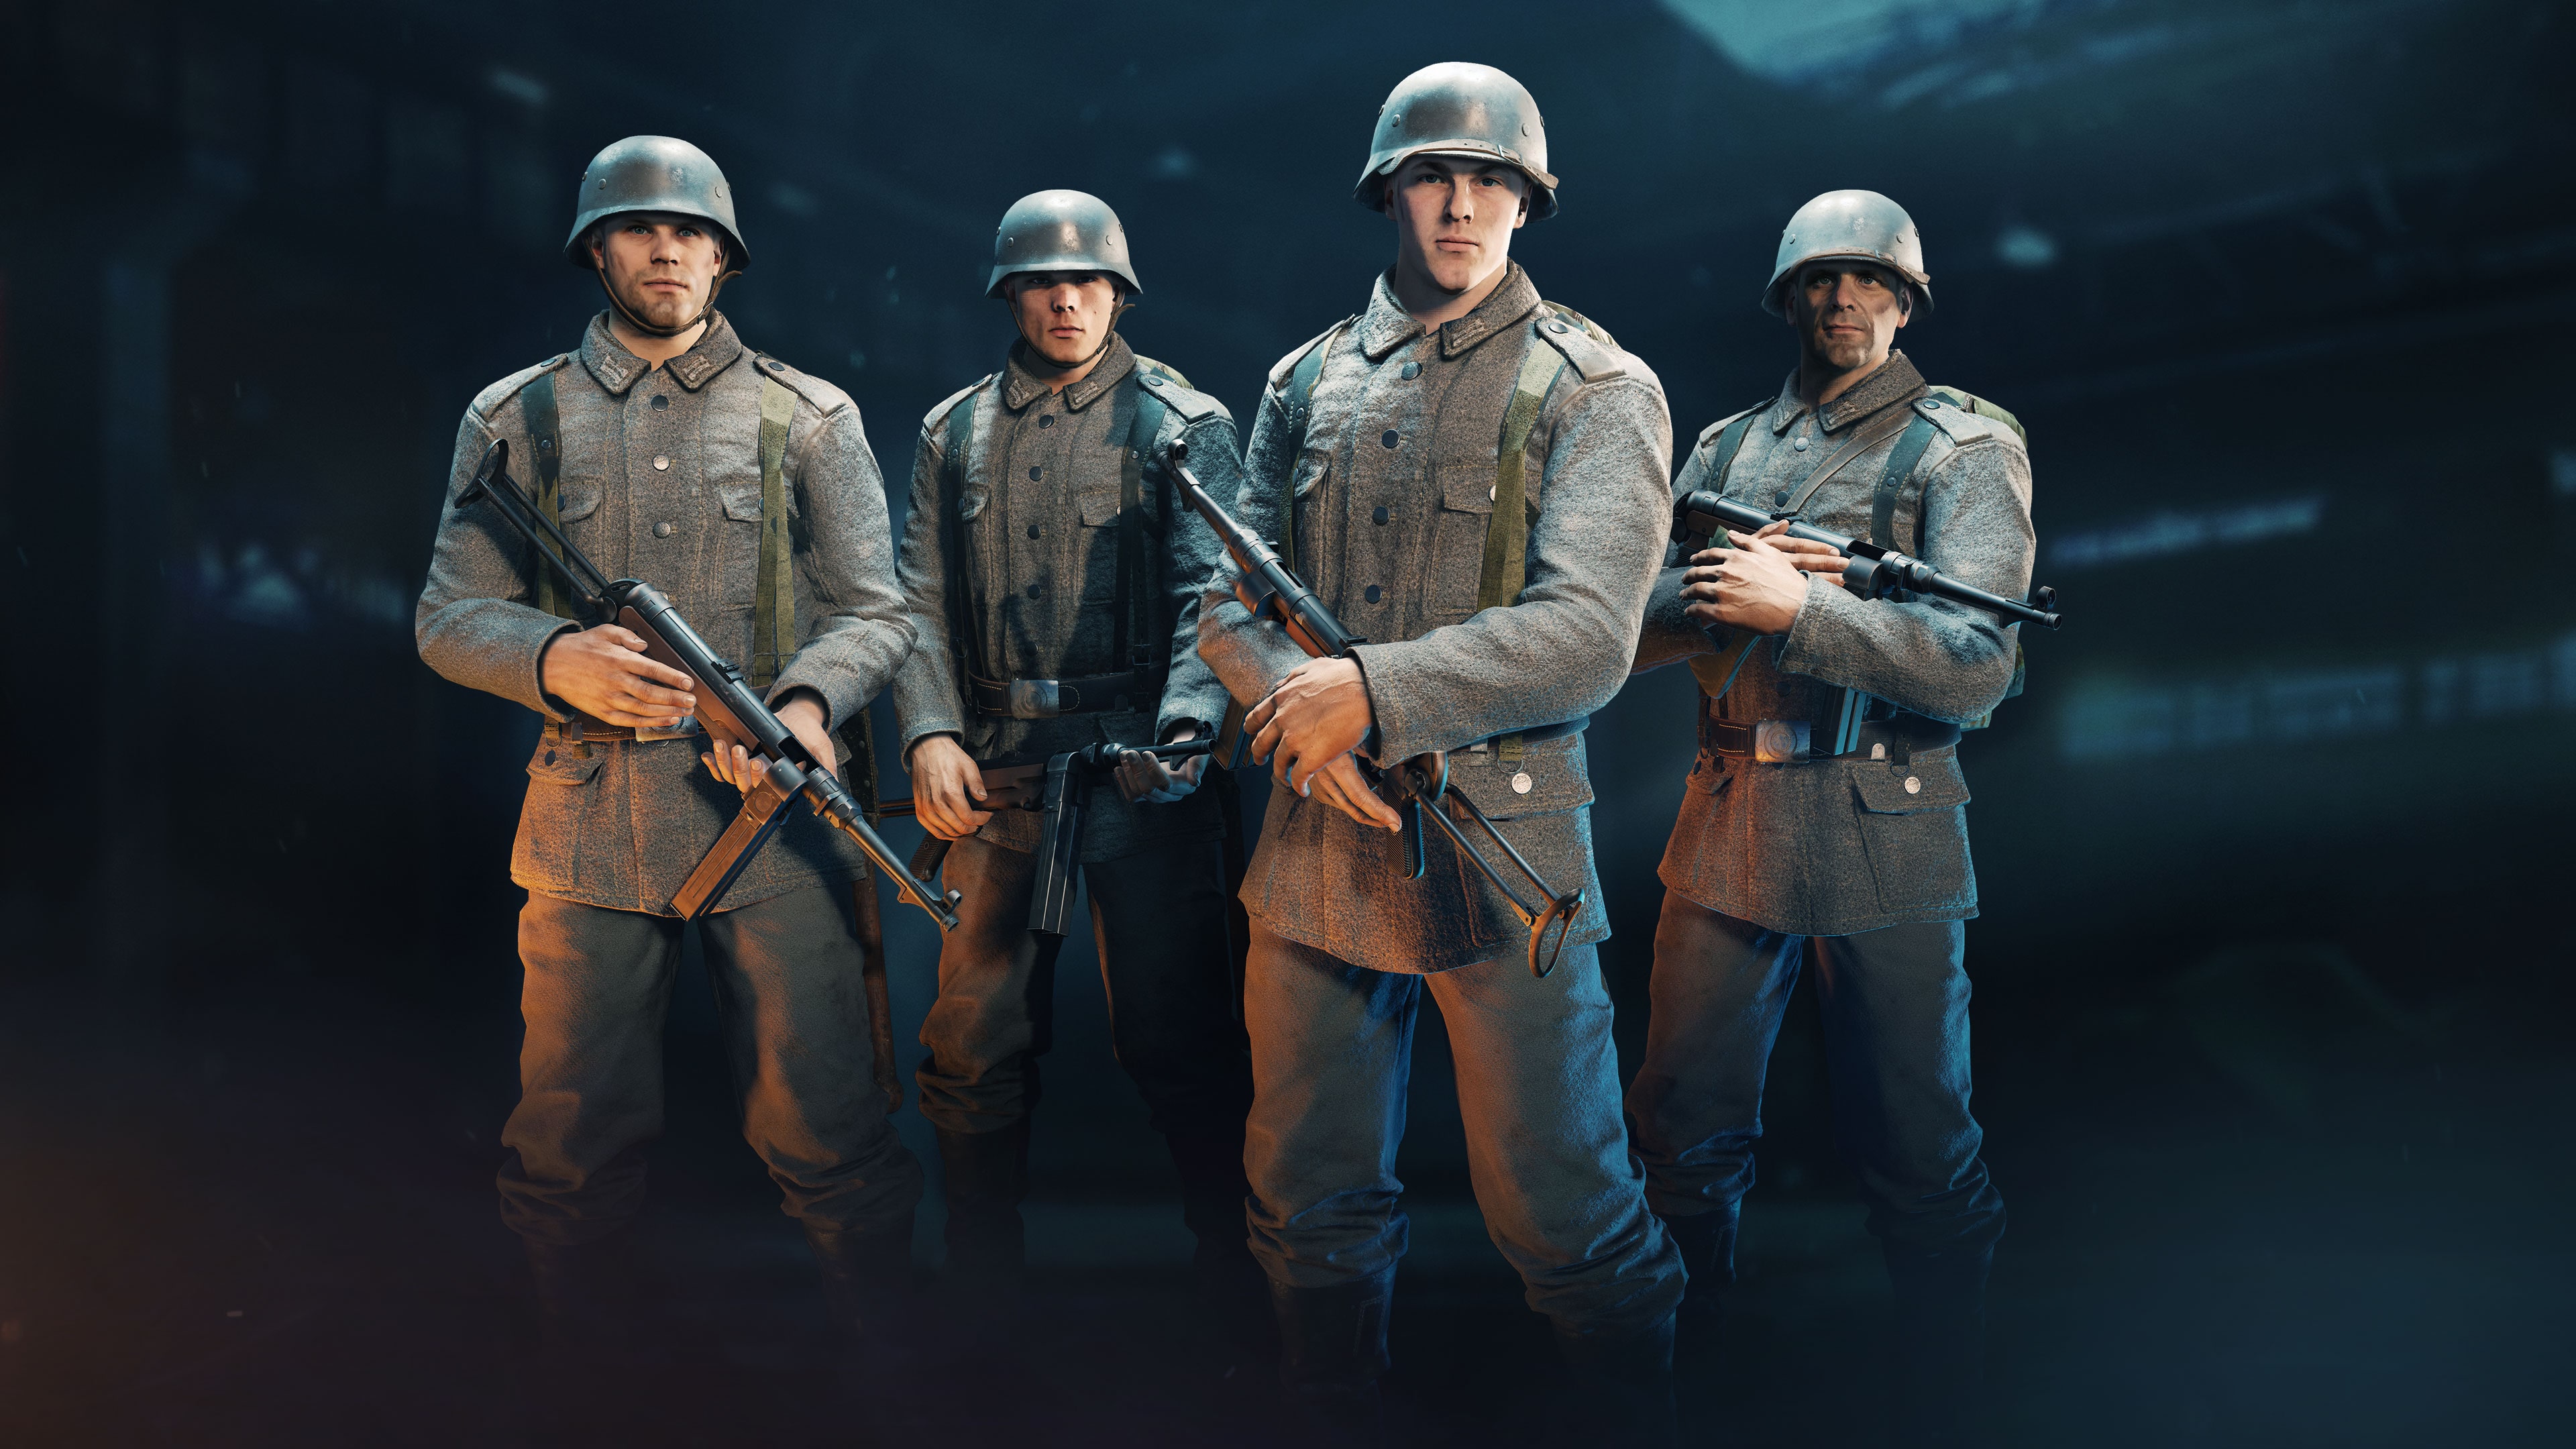 Enlisted - "Berlin": MP 40/1 Squad